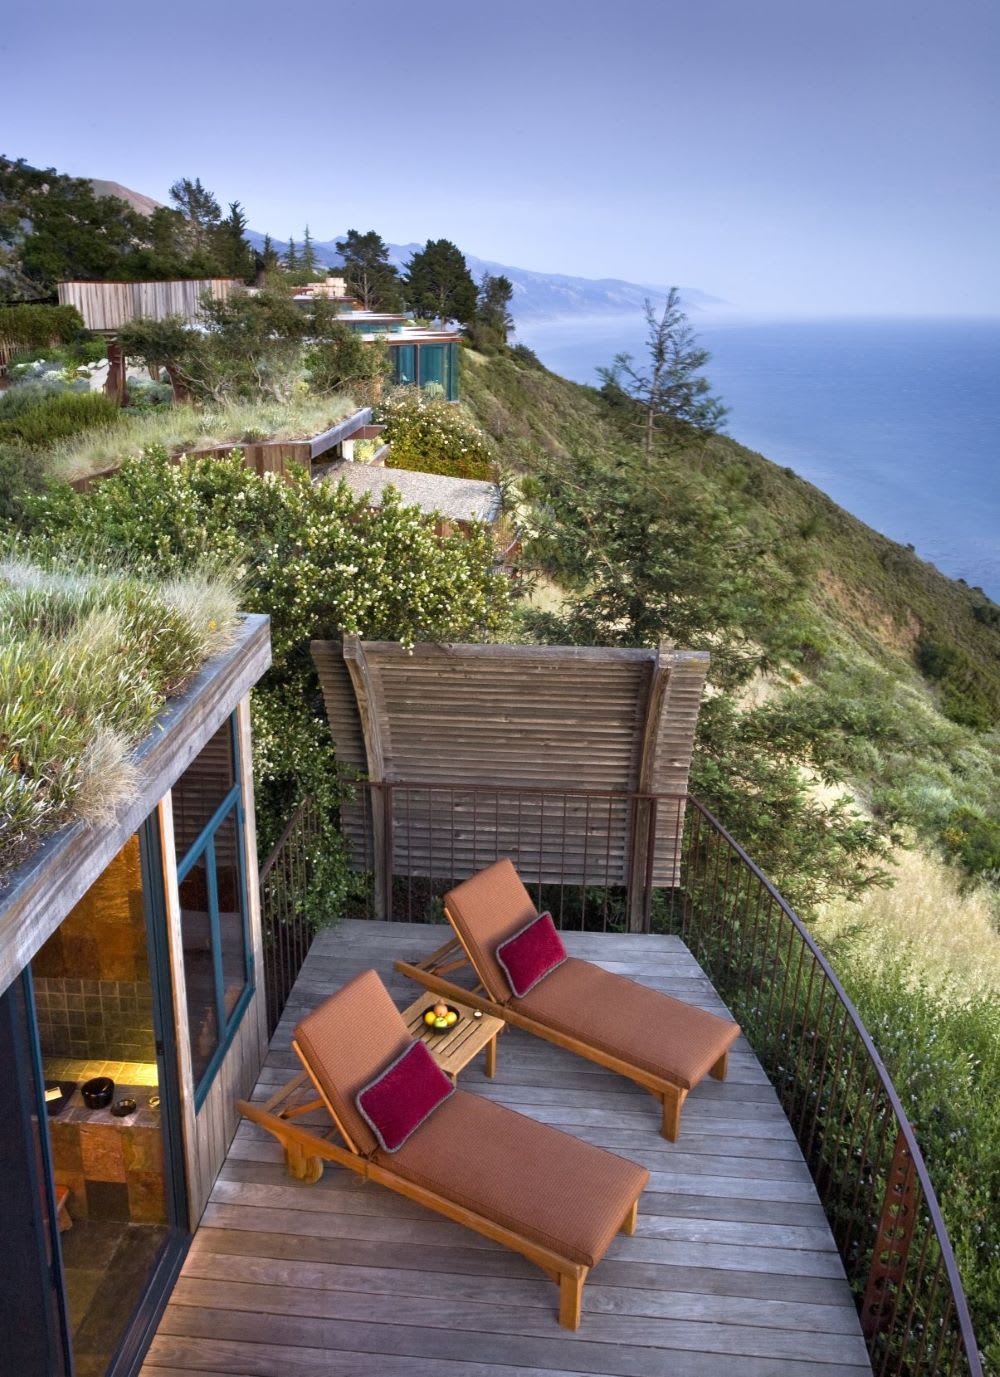 Post Ranch balcony in big sur as one of 4 luxury honeymoon destinations